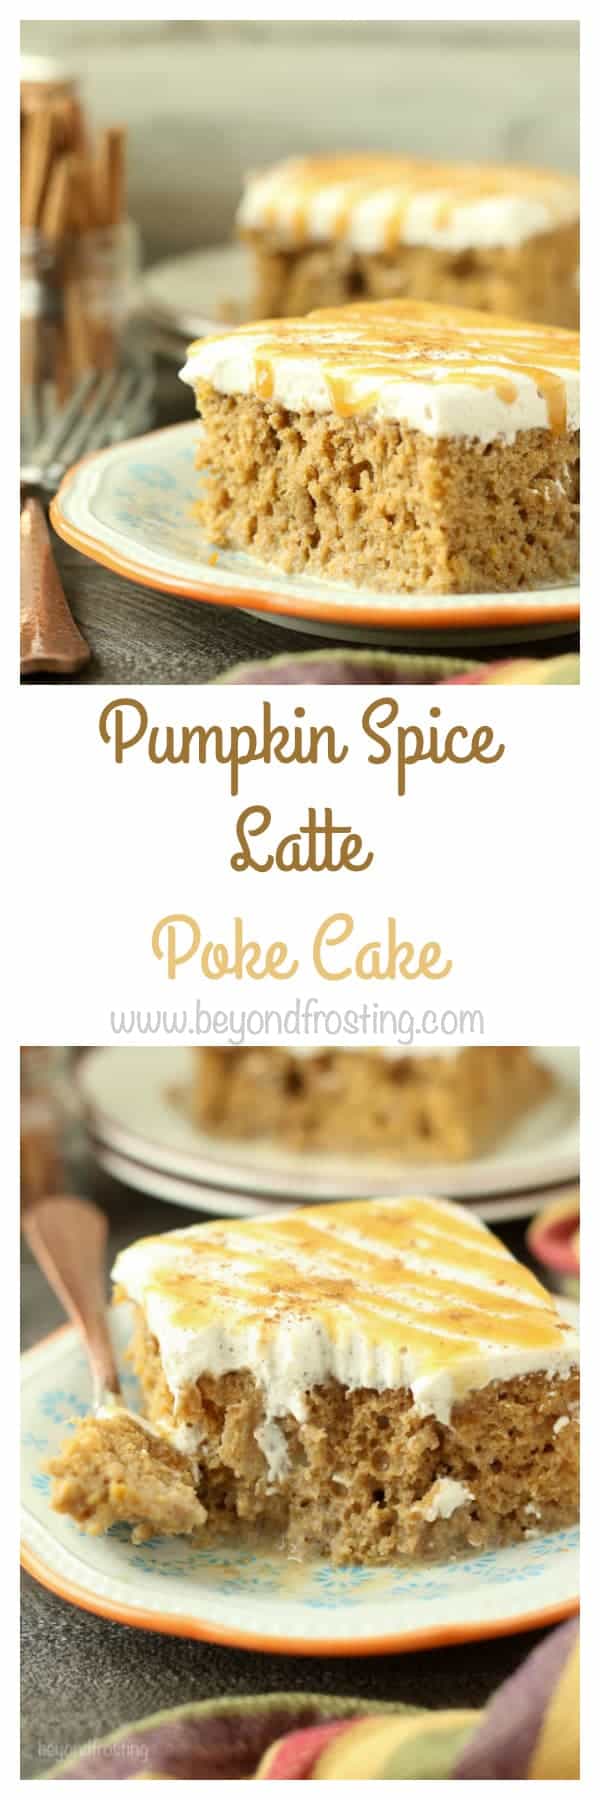  This Pumpkin Spice Latte Poke Cake is a simple pumpkin cake soaked in an espresso cream and topped with a cinnamon mocha whipped cream.